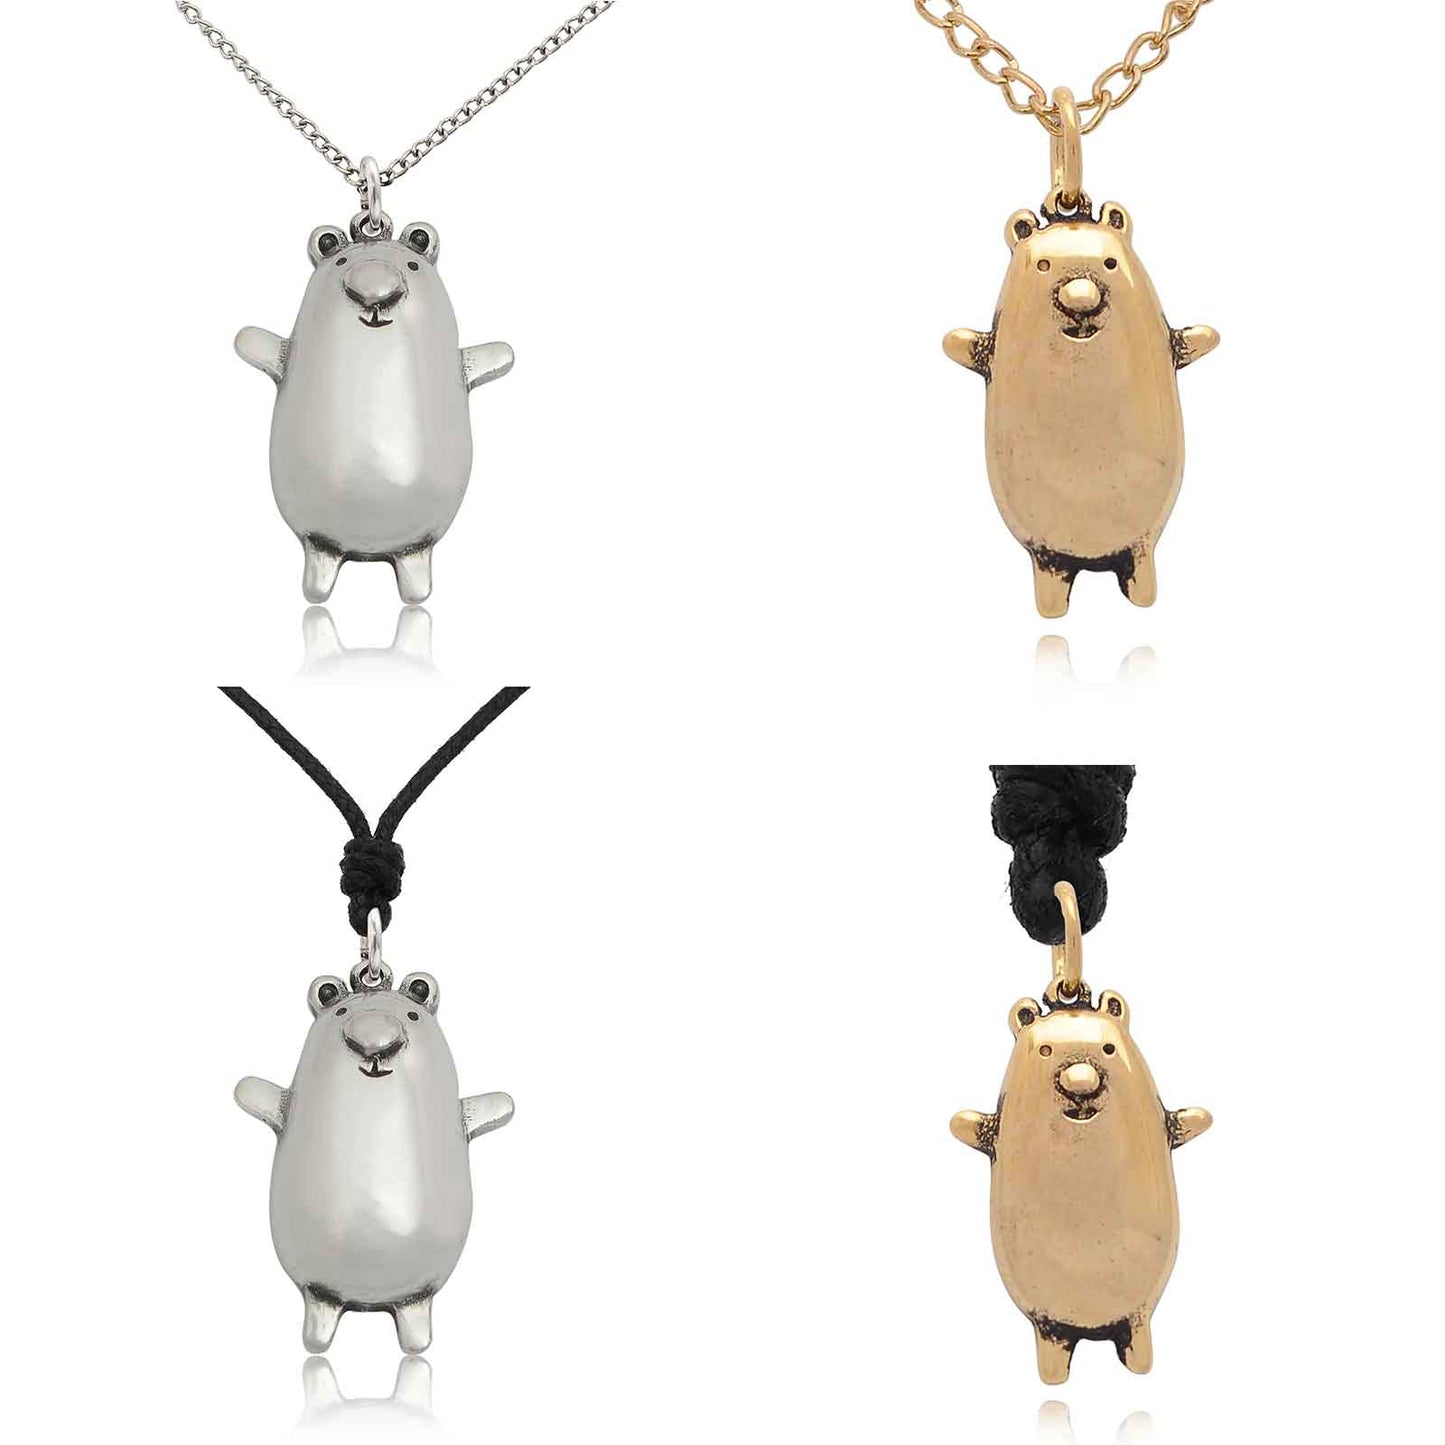 Chubby Groundhog Size M & S Silver Pewter Gold Brass Necklace Pendant Jewelry